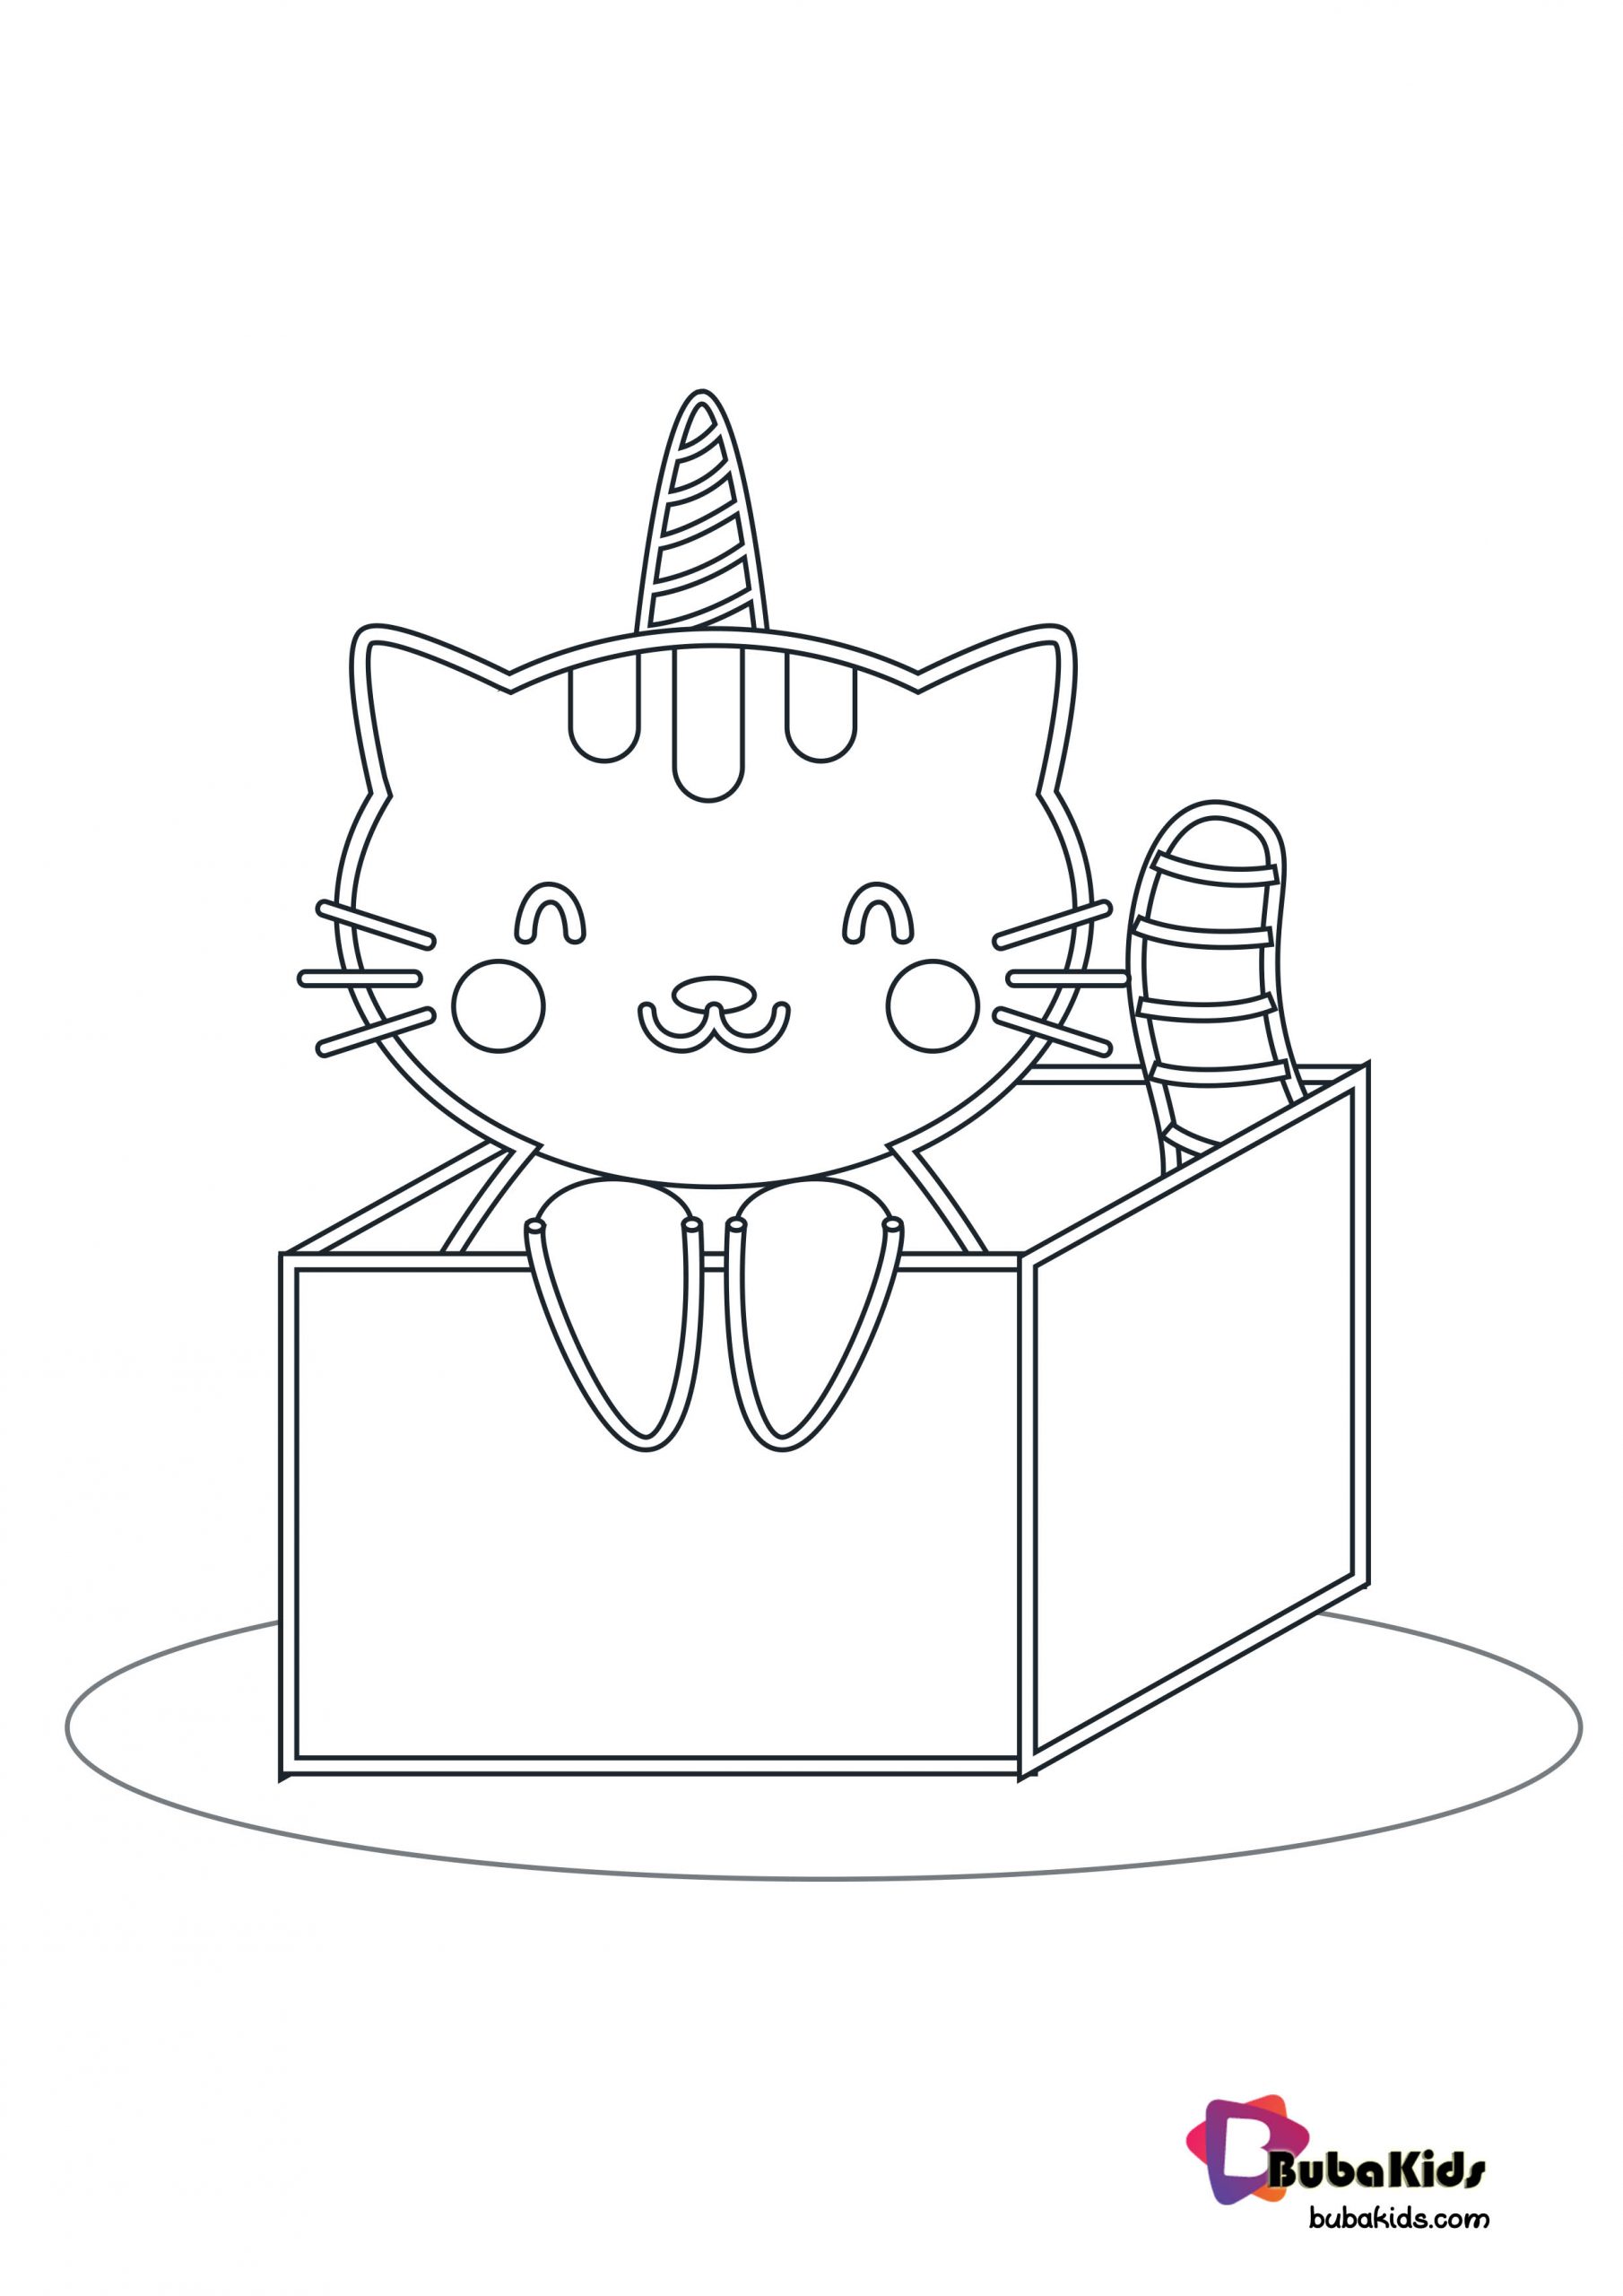 Cat in The Box Coloring Page Wallpaper